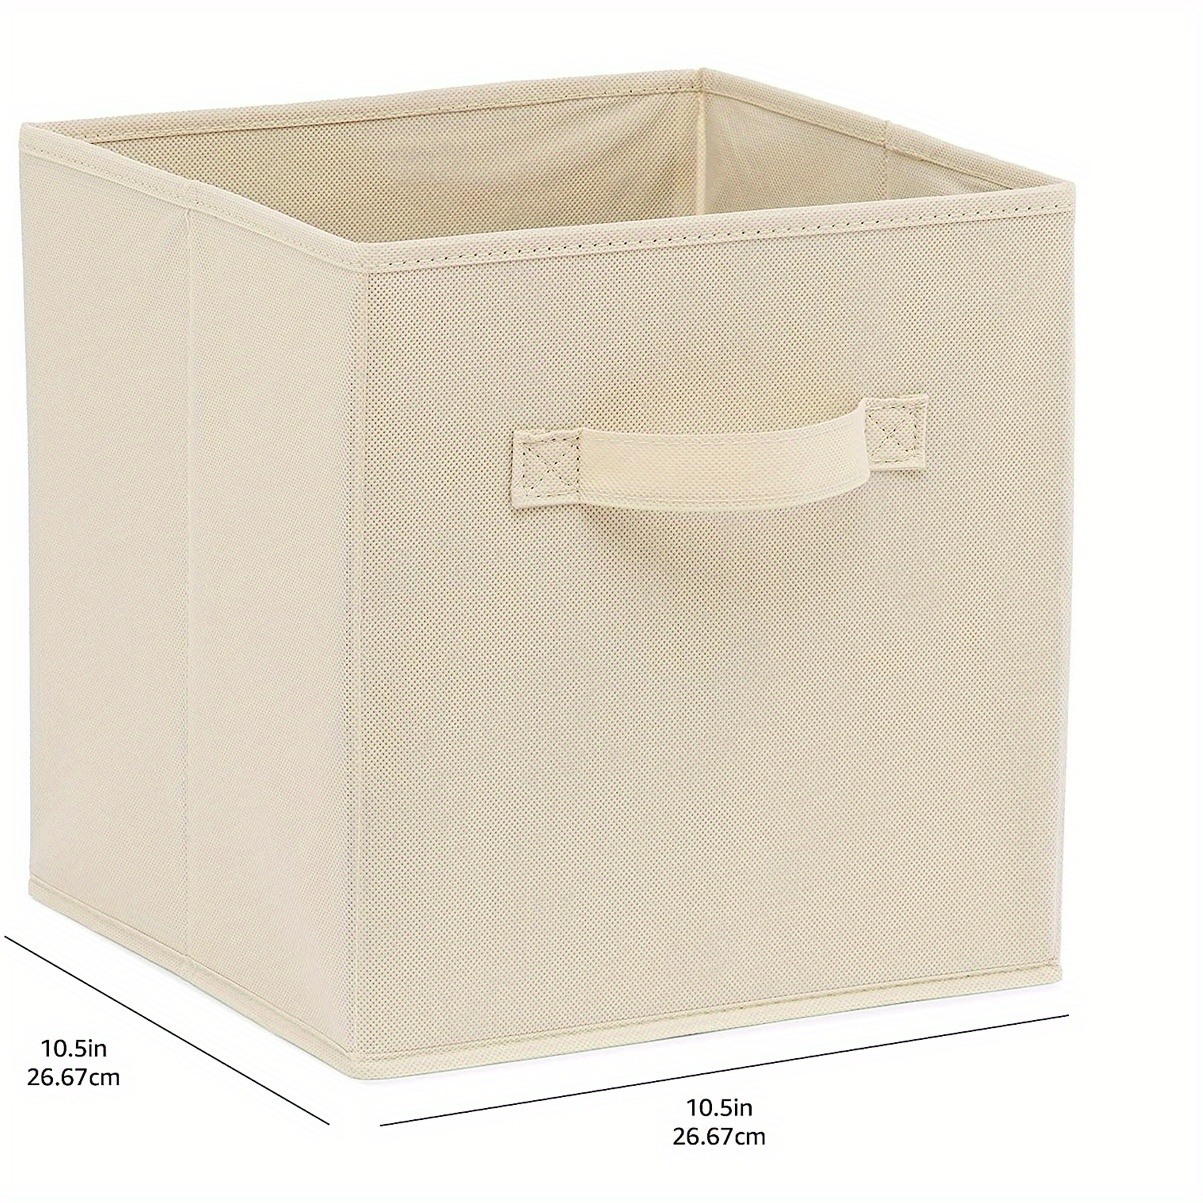 Collapsible Storage Bins with Lids Fabric Decorative Storage Boxes Cubes Organizer  Containers Baskets 